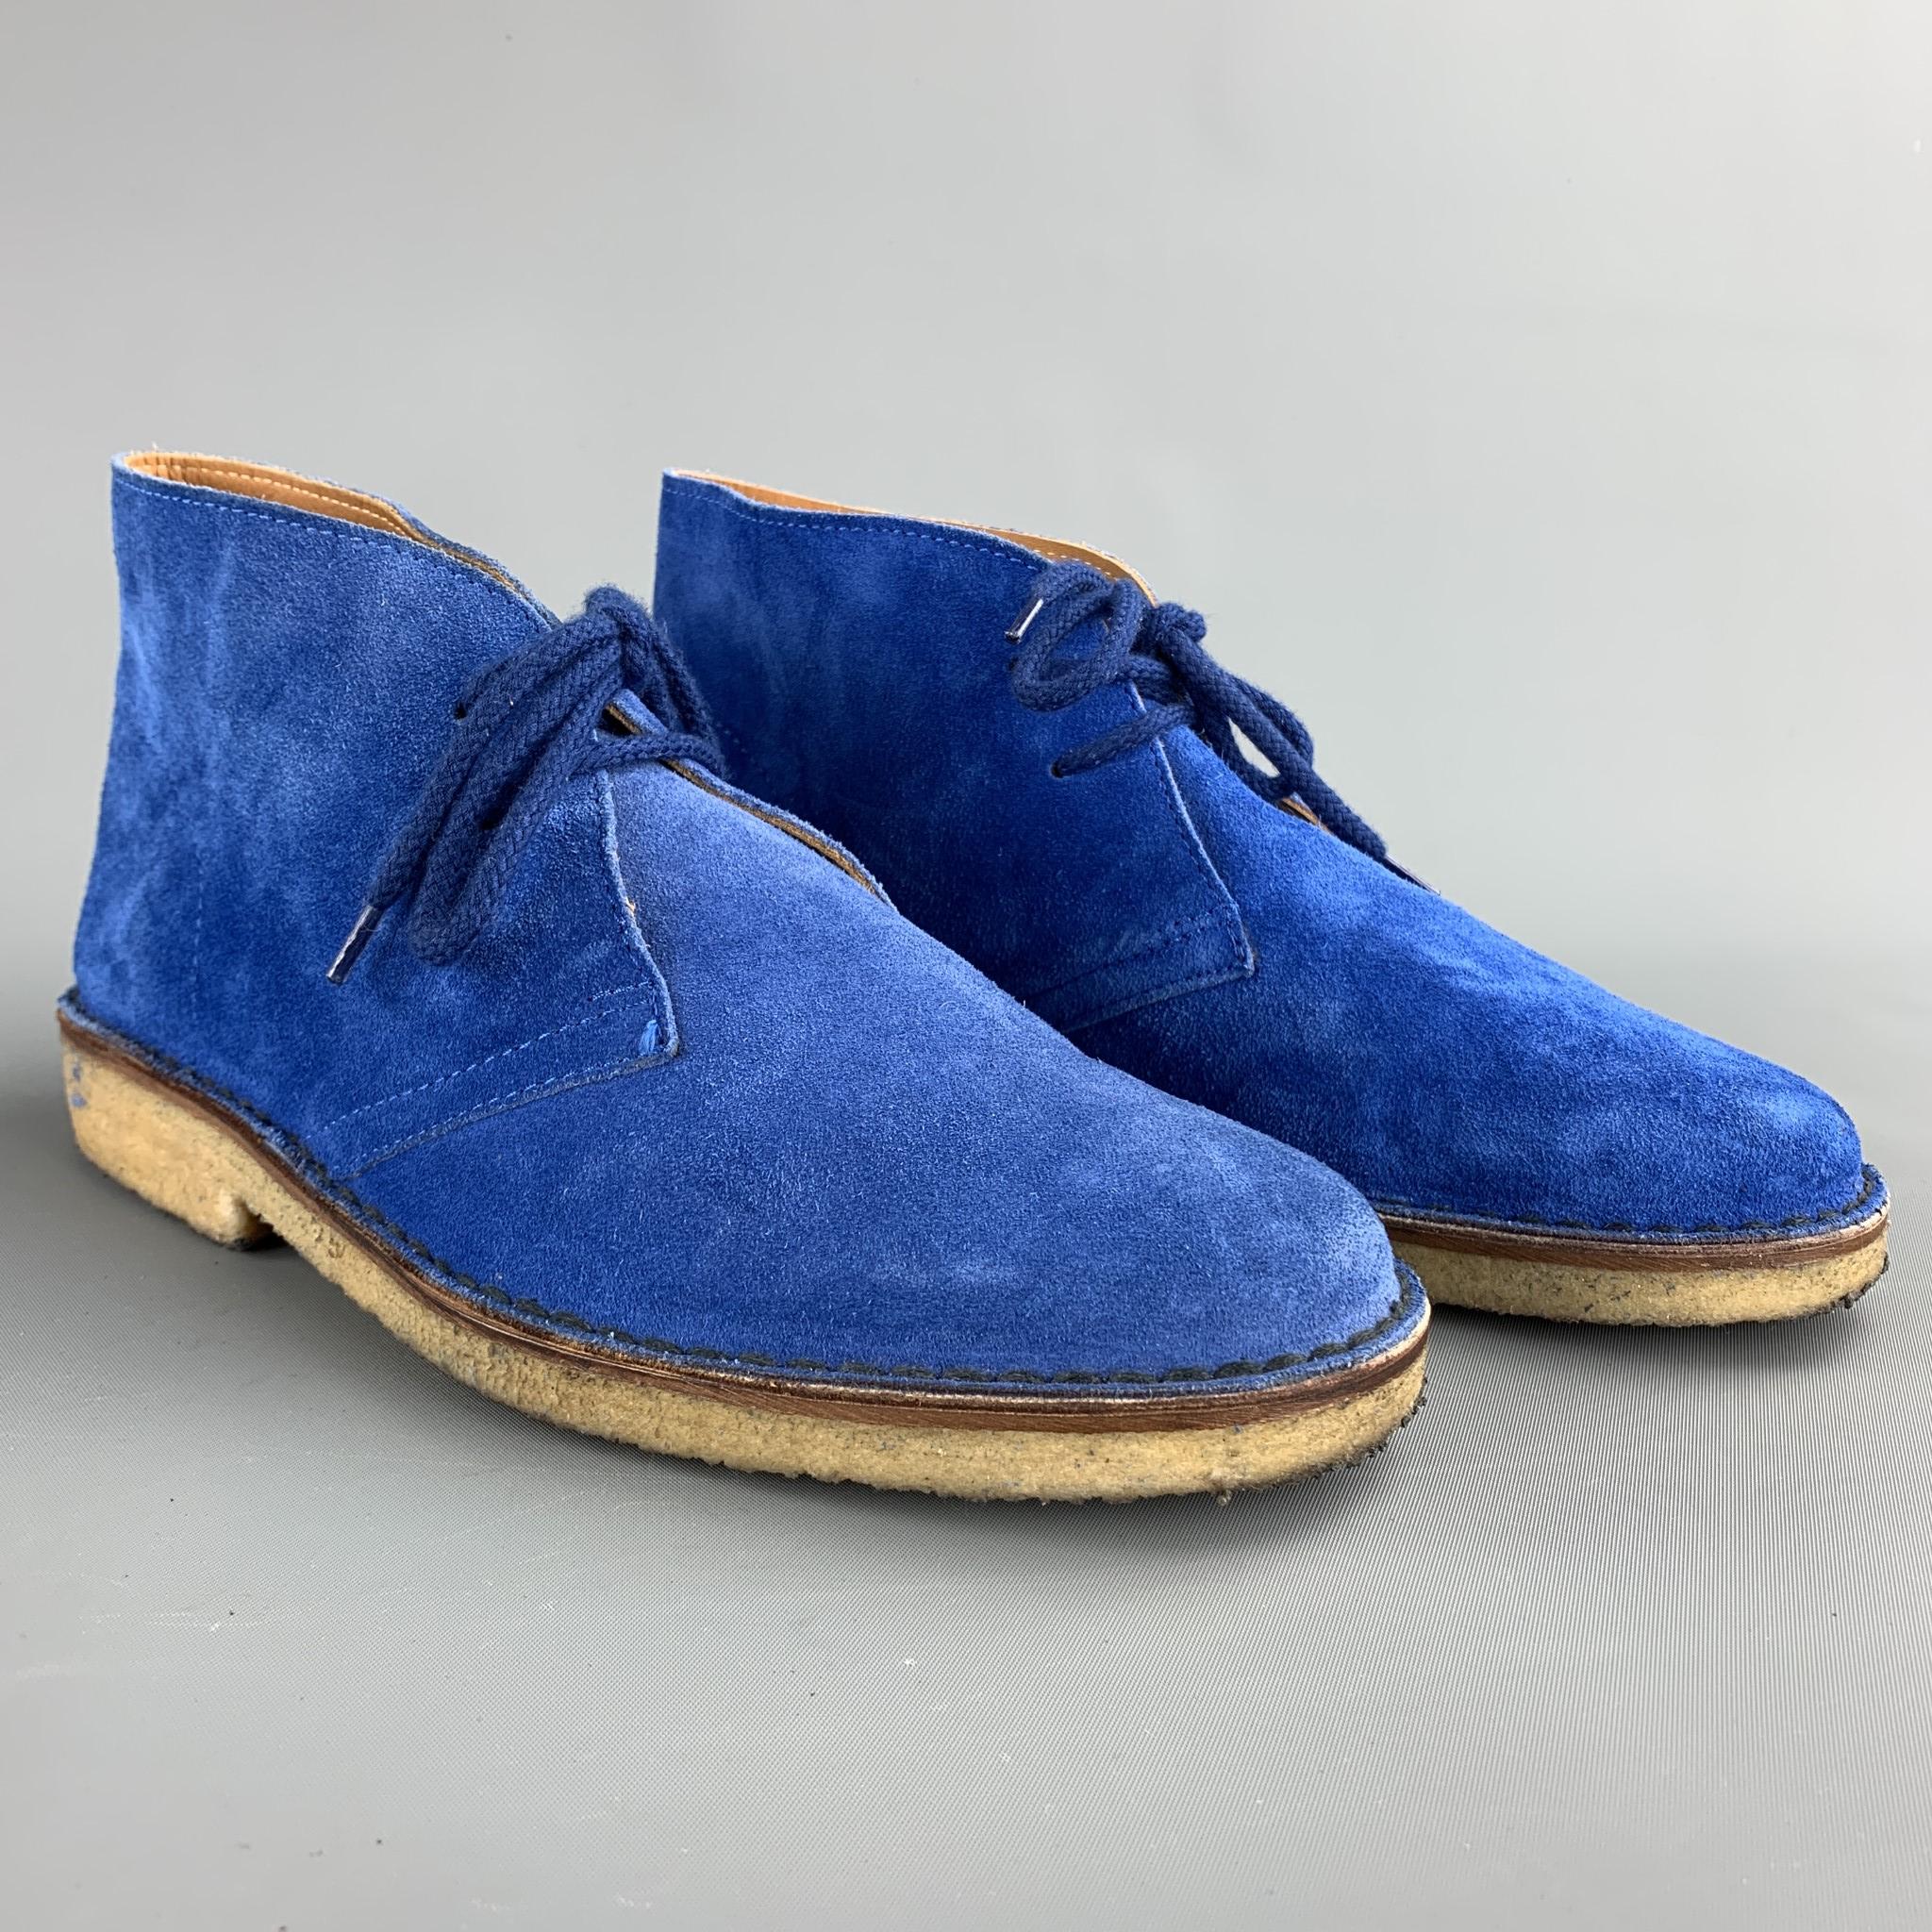 BARNEY'S NEW YORK lace up boots comes in a royal blue suede featuring a desert style and a crepe sole.

Good Pre-Owned Condition.
Marked: 7

Outsole:

10.5 in. x 4 in. 